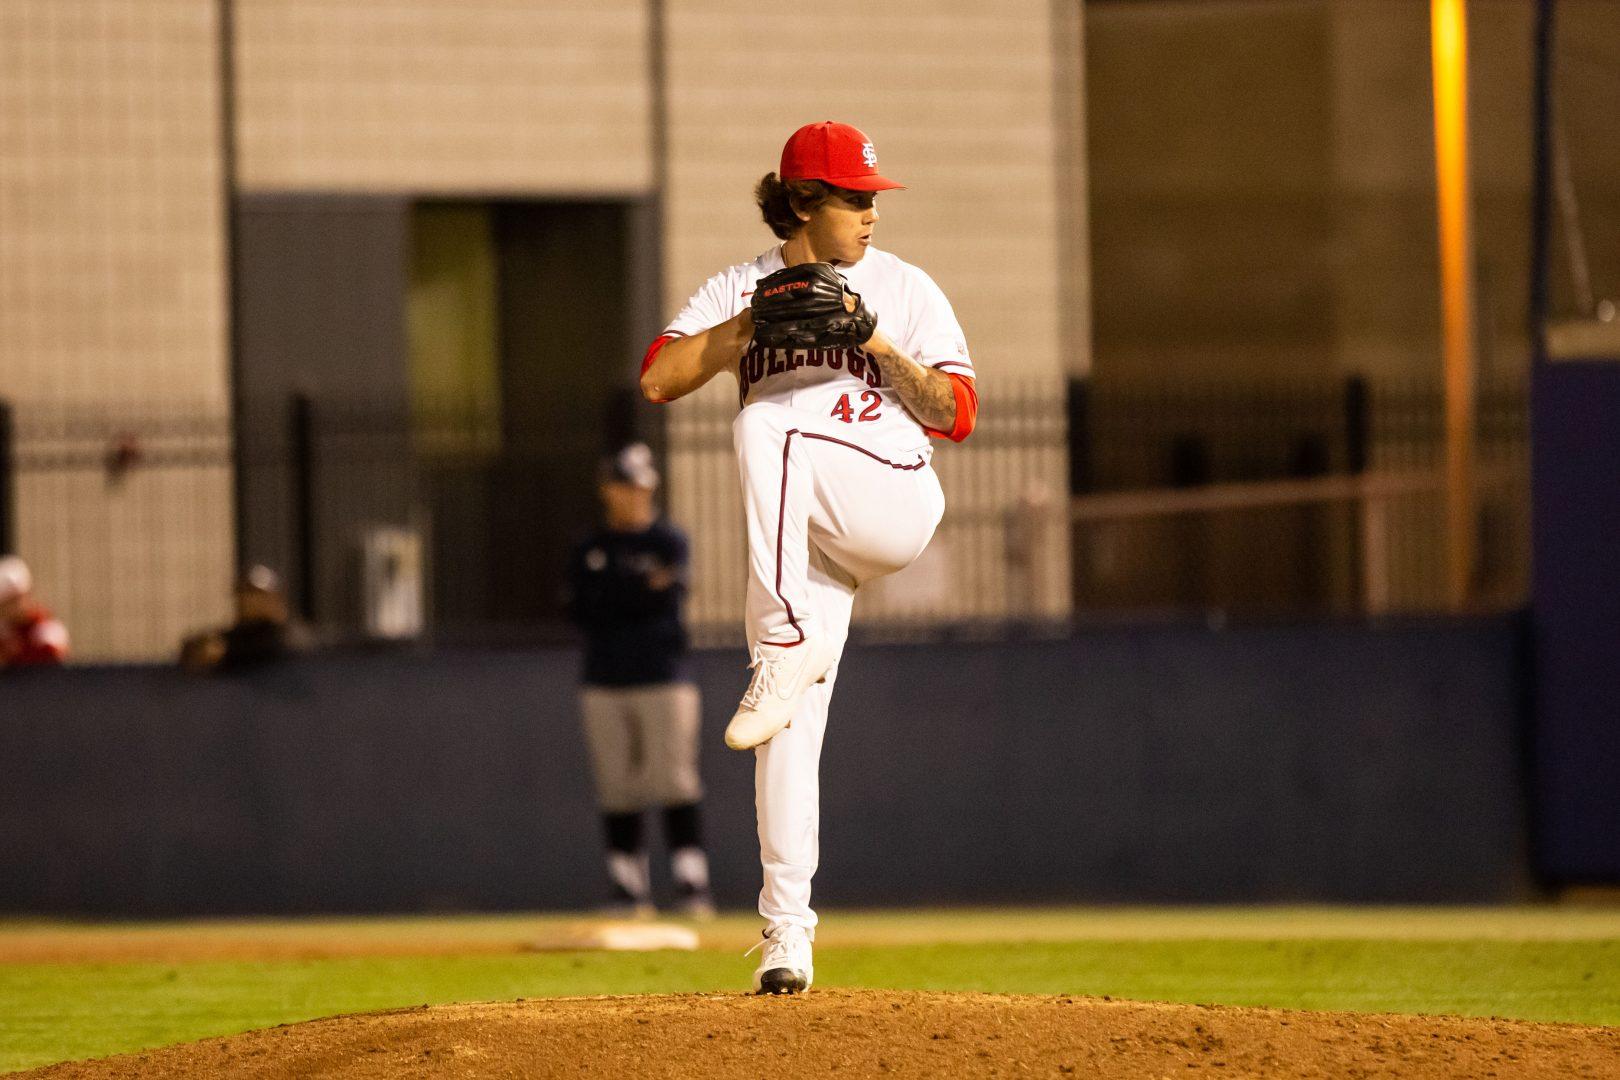 Pitcher Nik Cardinal (42) comes in relief against UC Irvine at Pete Beiden Field at Bob Bennett Stadium on Friday, Feb. 14, 2020. (Armando Carreno/The Collegian)